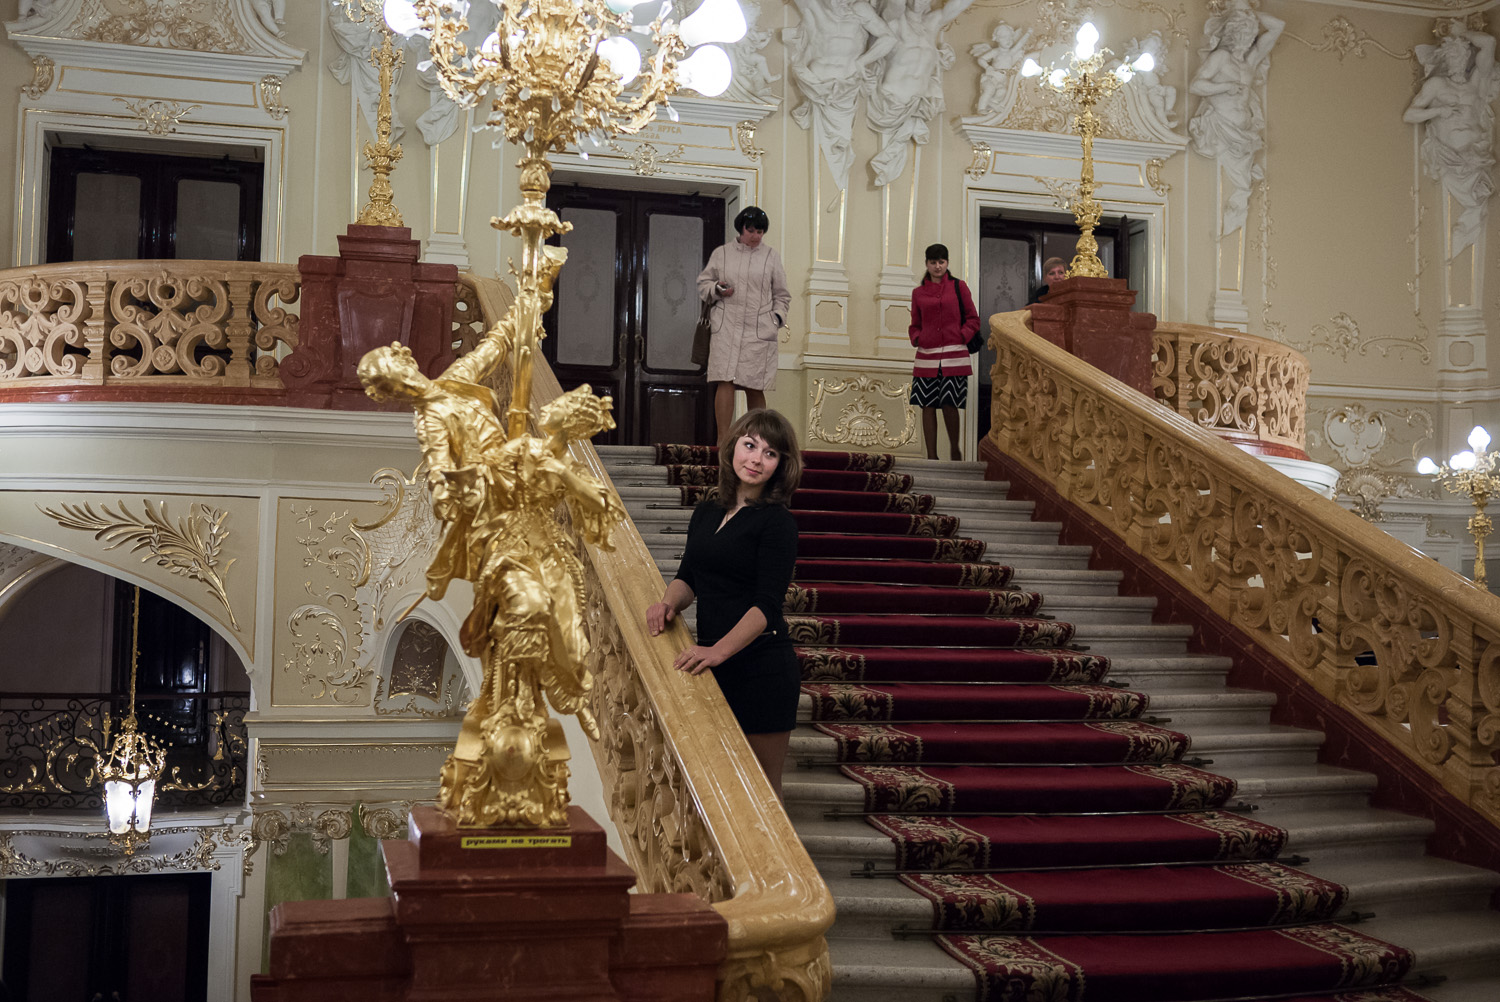  A young woman pictured after a performance in Kyiv’s opera house. 